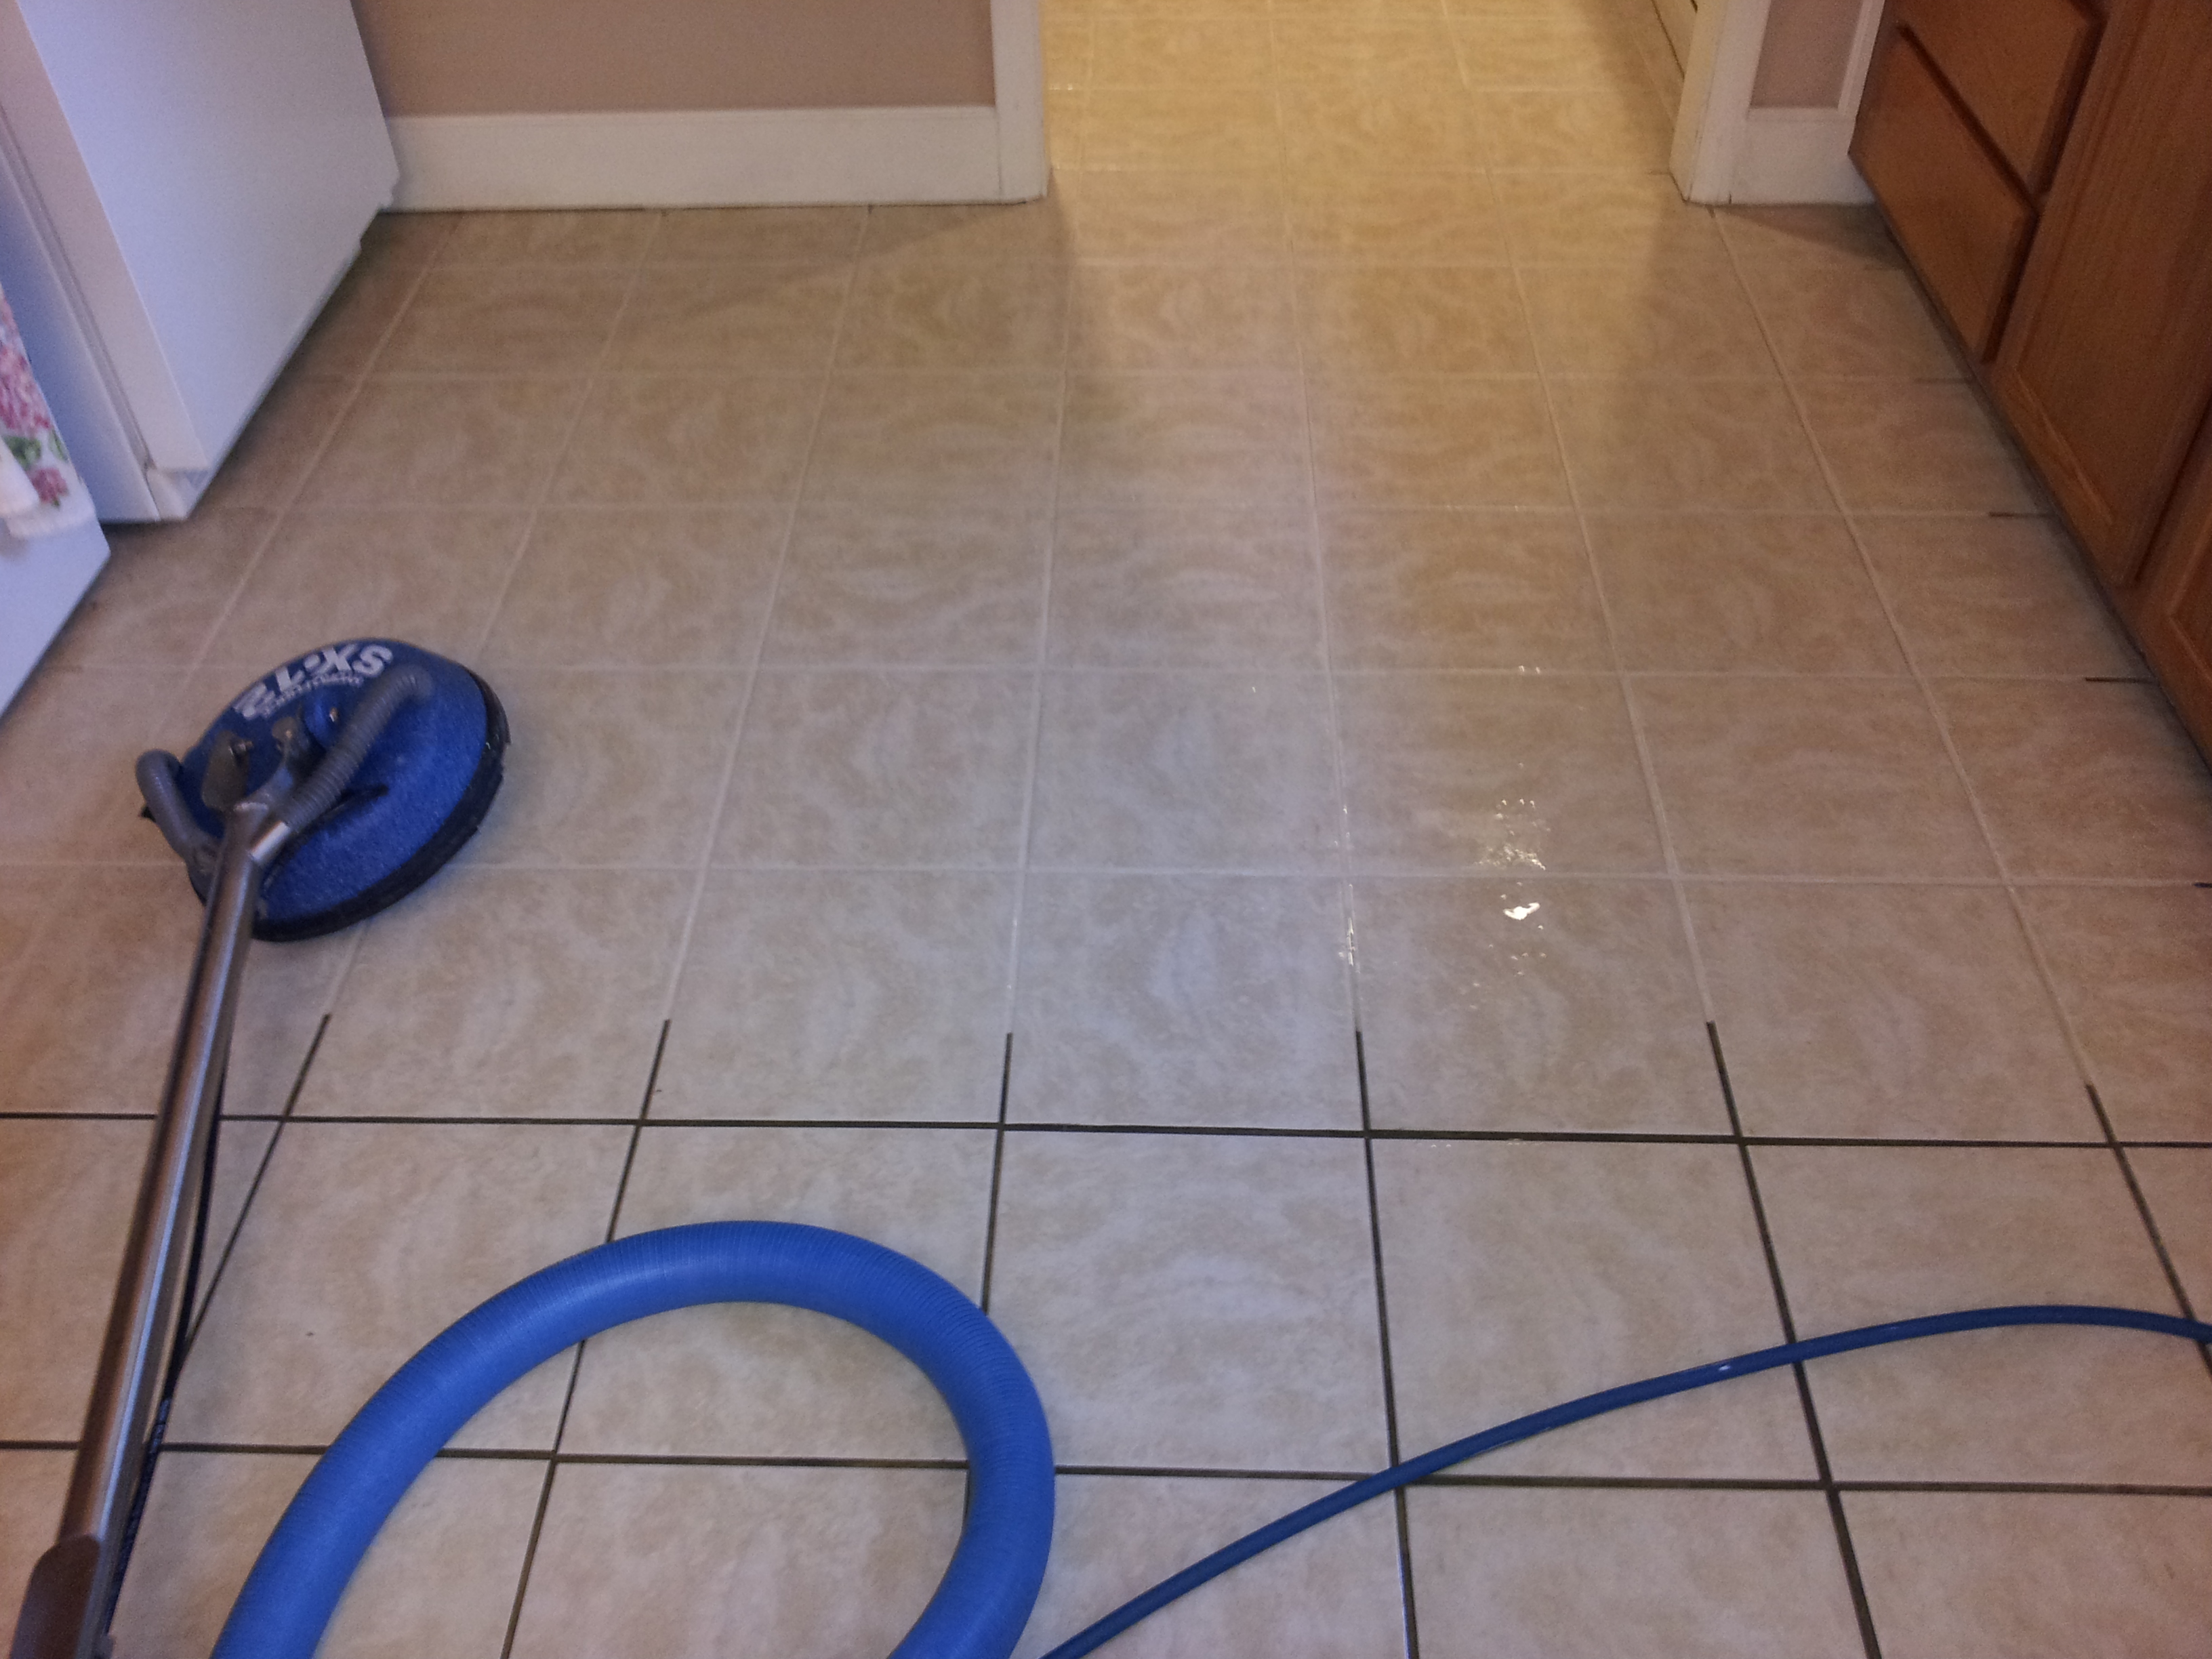 Ultimate Tile Grout Cleaning S, How To Clean Tile Floor Grout With Vinegar